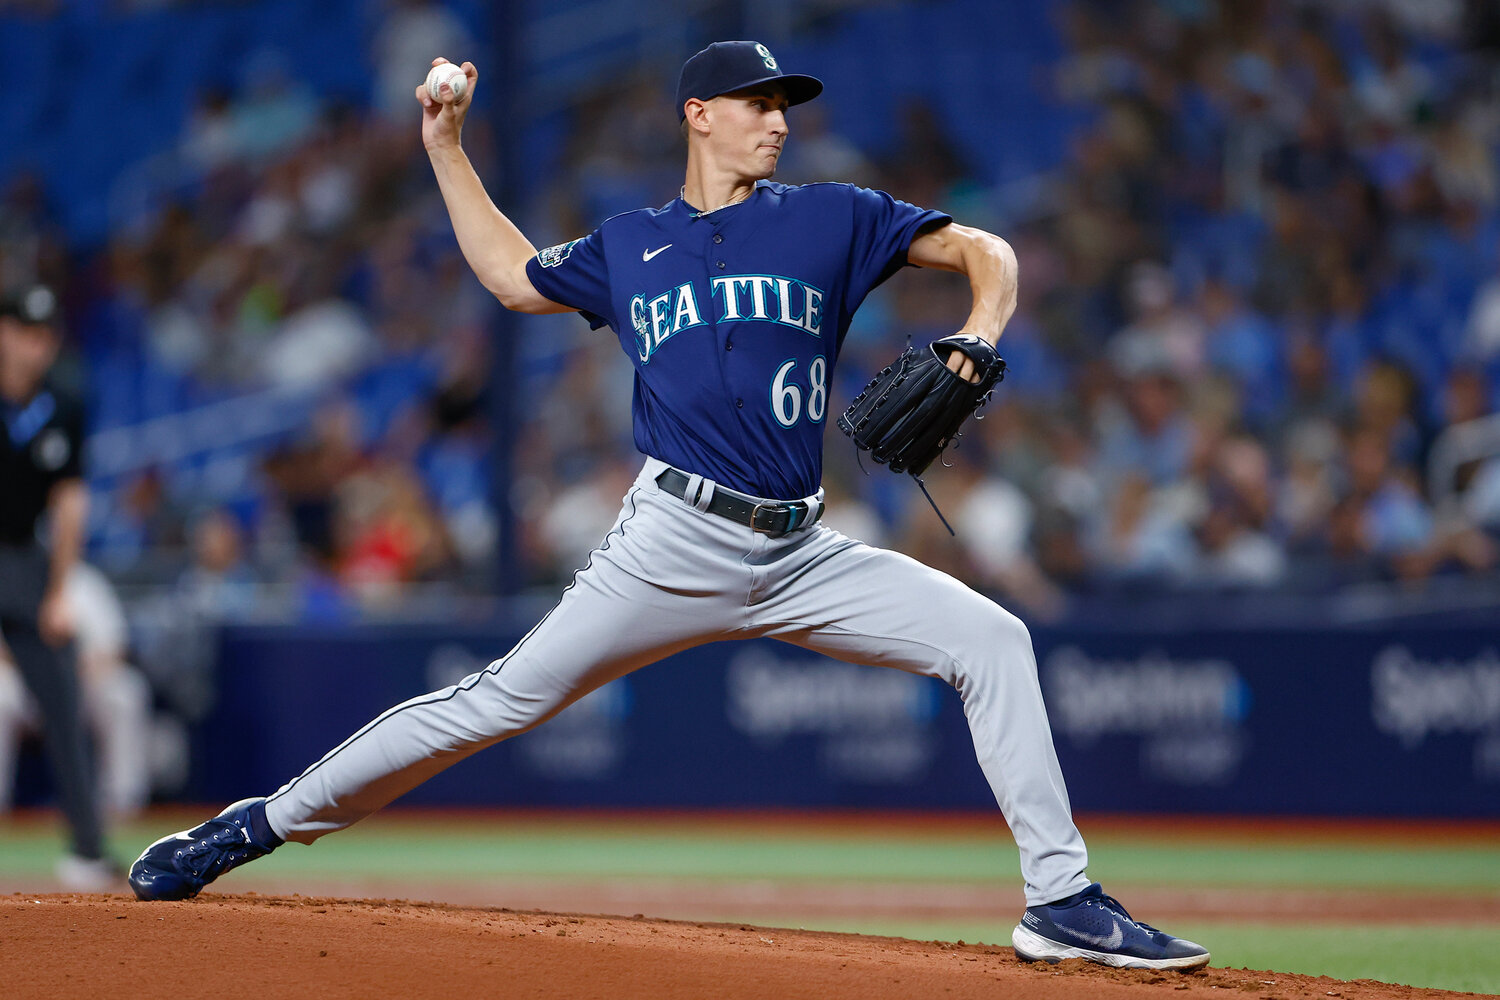 George Kirby of the Seattle Mariners throws a pitch during the first inning against the Tampa Bay Rays at Tropicana Field on September 8, 2023 in St. Petersburg, Florida. (Photo by Douglas P. DeFelice/Getty Images TNS)